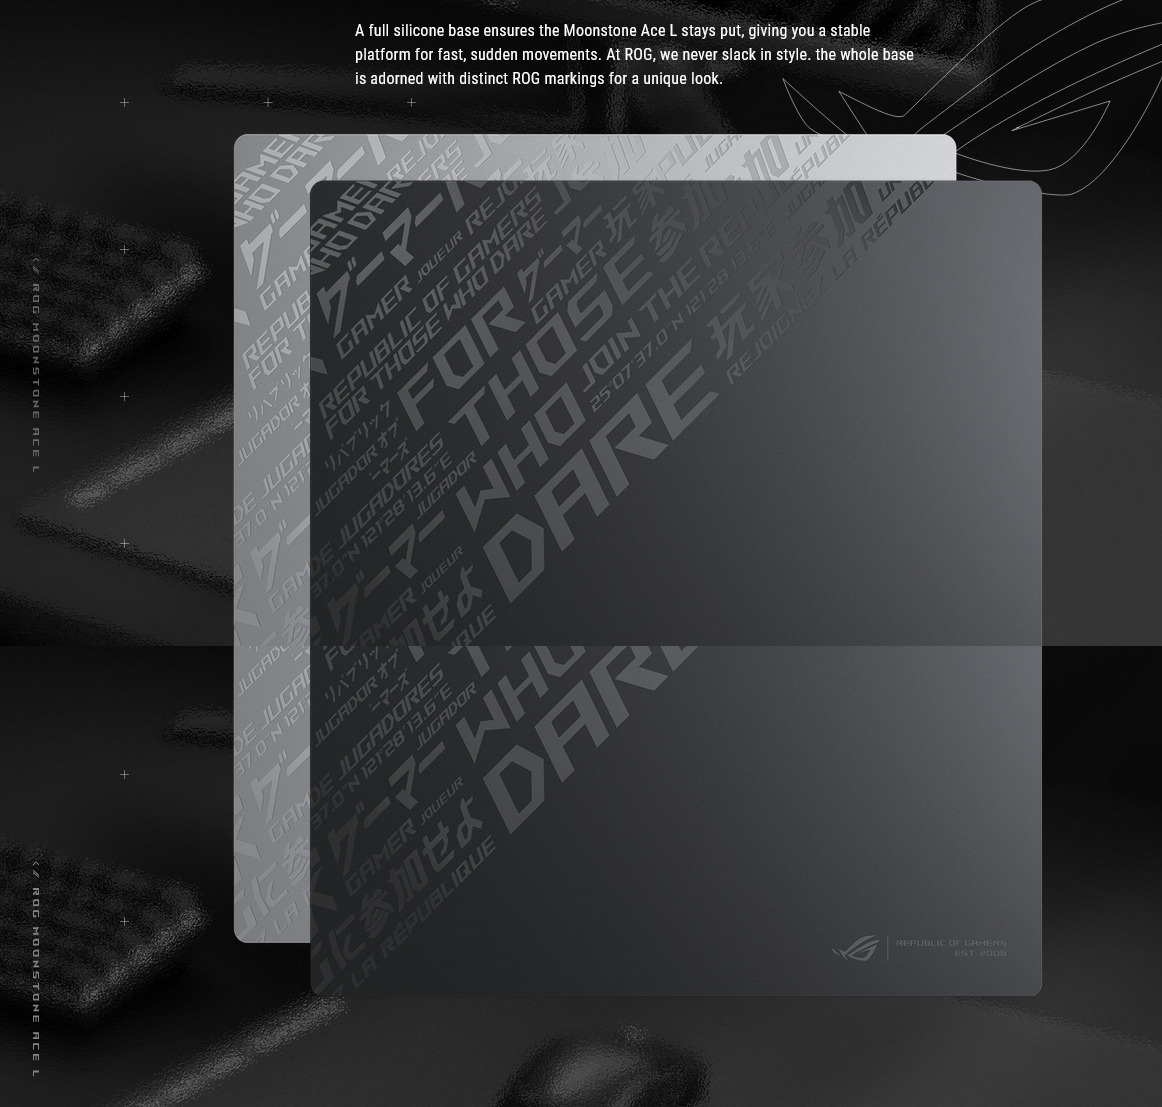 A large marketing image providing additional information about the product ASUS ROG Moonstone Ace Large Gaming Mousemat - White - Additional alt info not provided